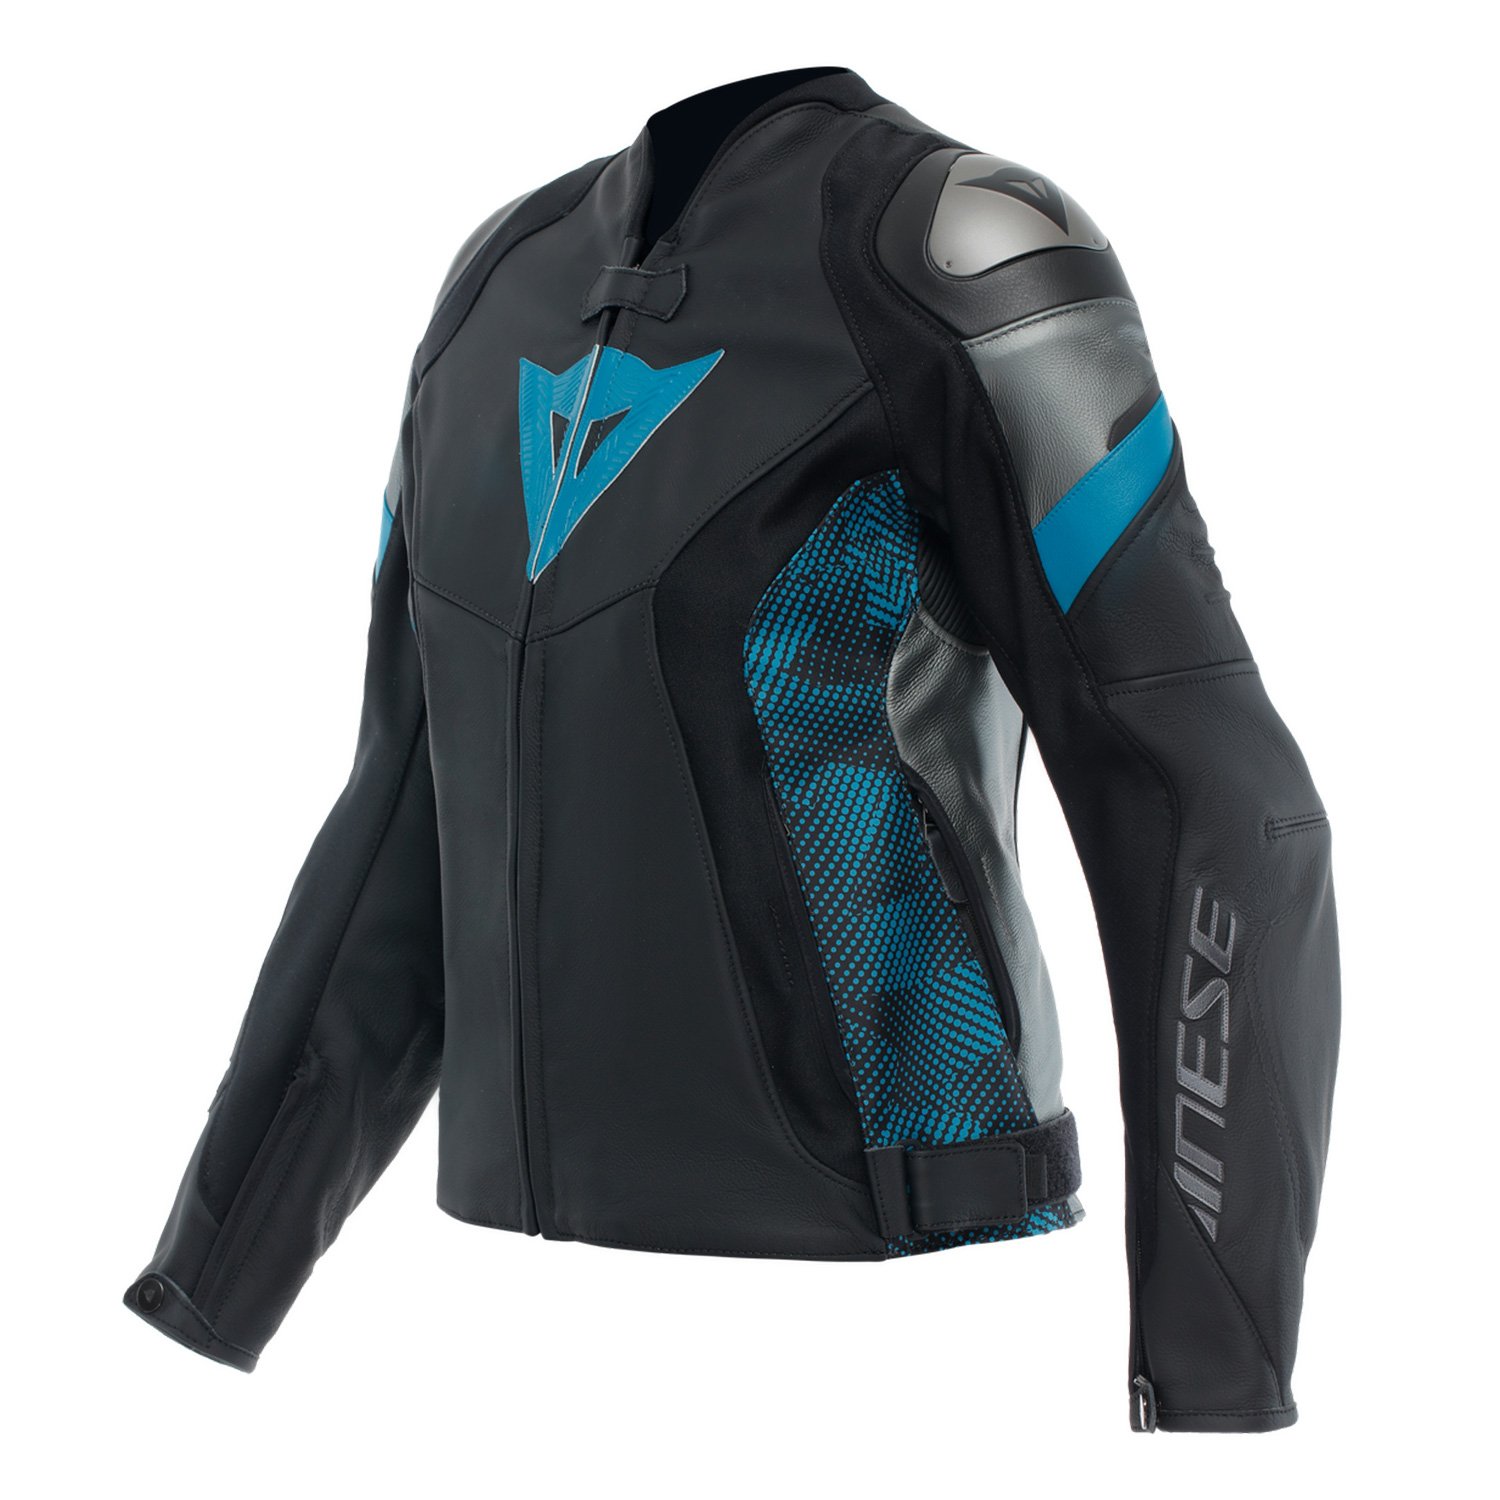 Image of Dainese Avro 5 Leather Jacket WMN Black Teal Anthracite Taille 38